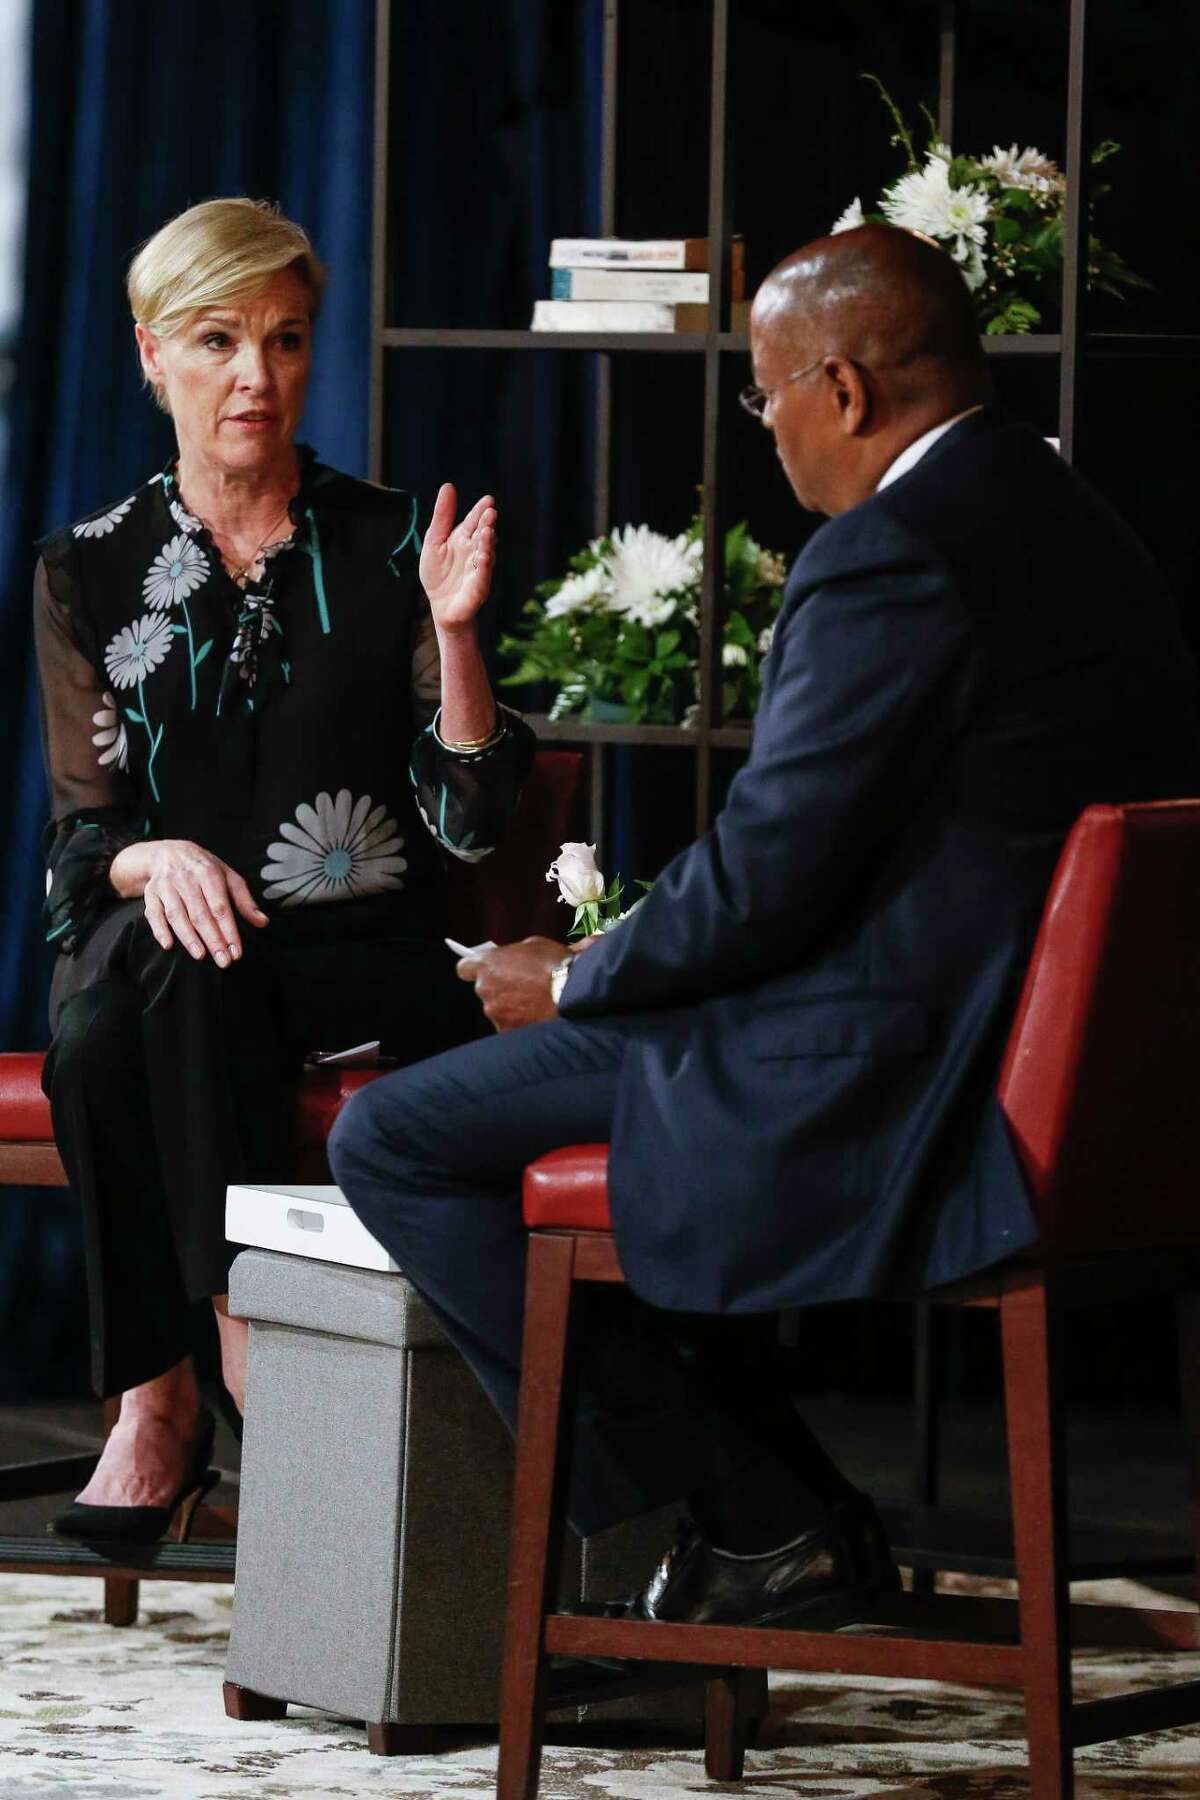 President of Planned Parenthood Cecile Richards, left, talks about her new book, “Make Trouble: Standing Up, Speaking Out, and Finding the Courage to Lead - My Life Story” with Commissioner Rodney Ellis at a Brazos Bookstore event Sunday, April 8, 2018 in Houston.